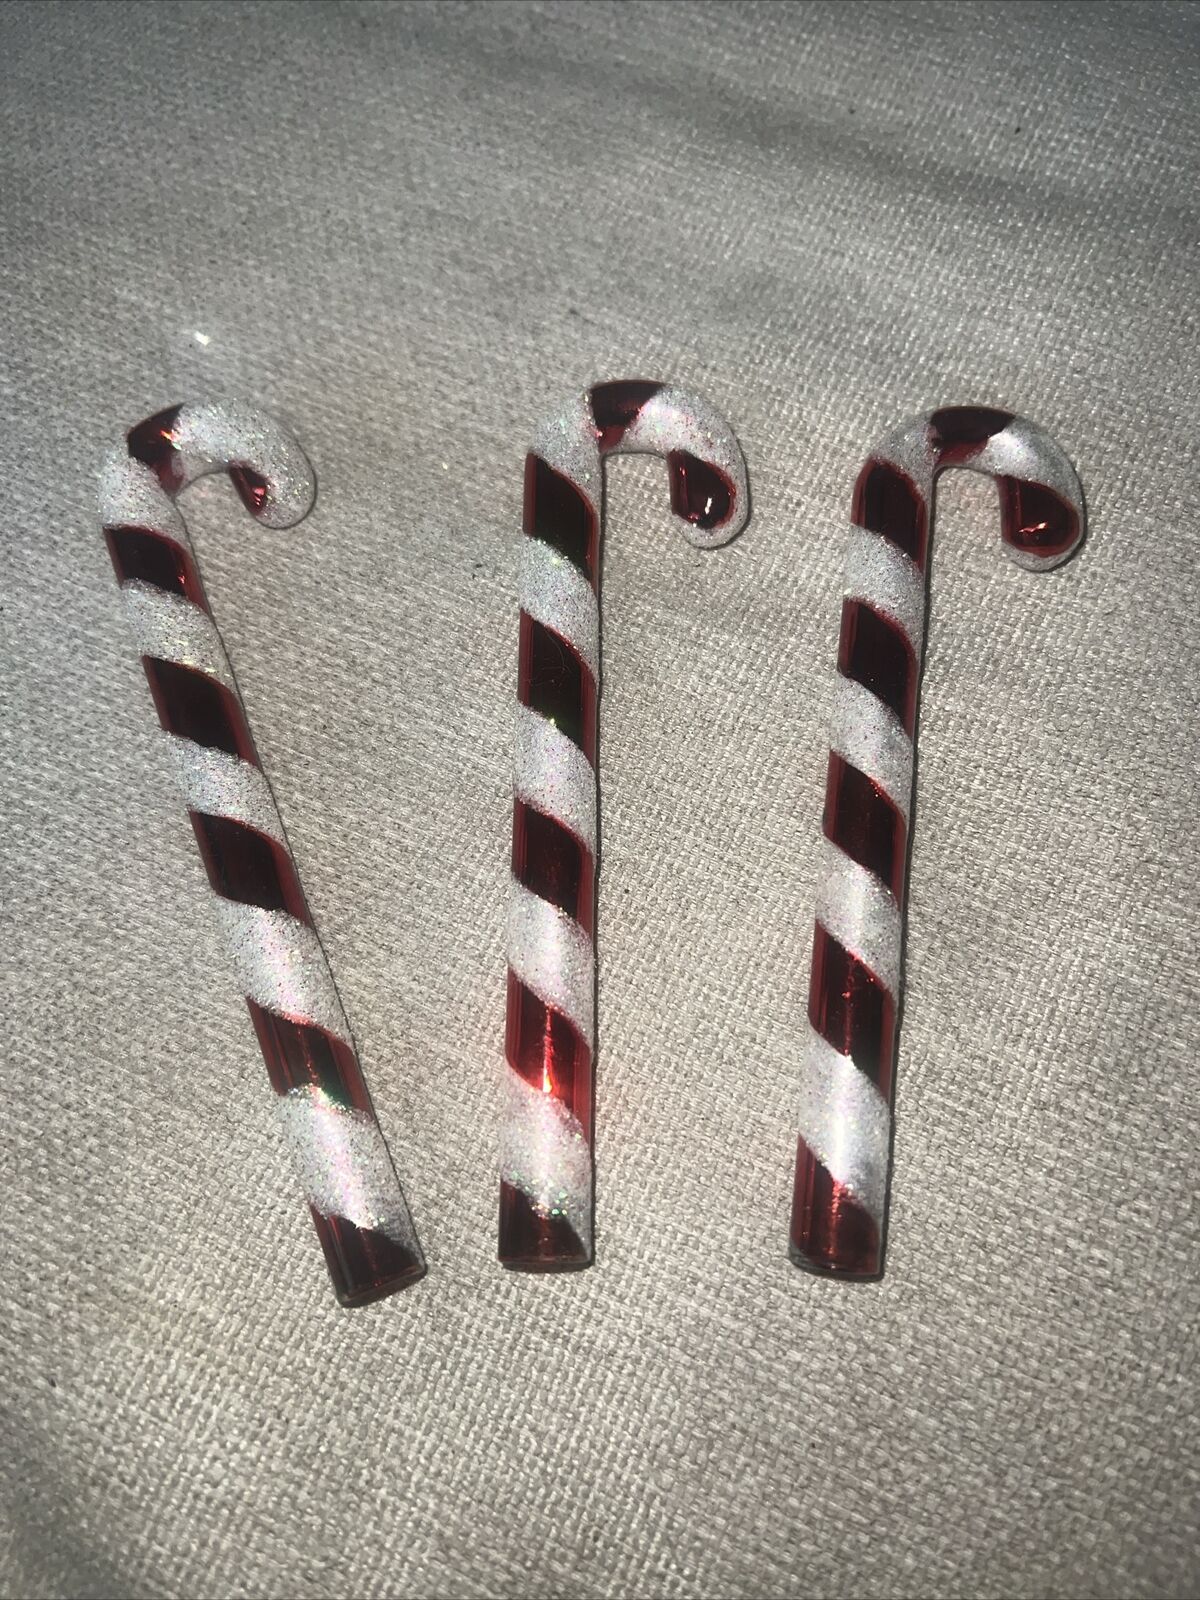 VINTAGE MERCURY GLASS CANDY CANES ORNAMENTS RED WHITE GLITTER Set Of 3